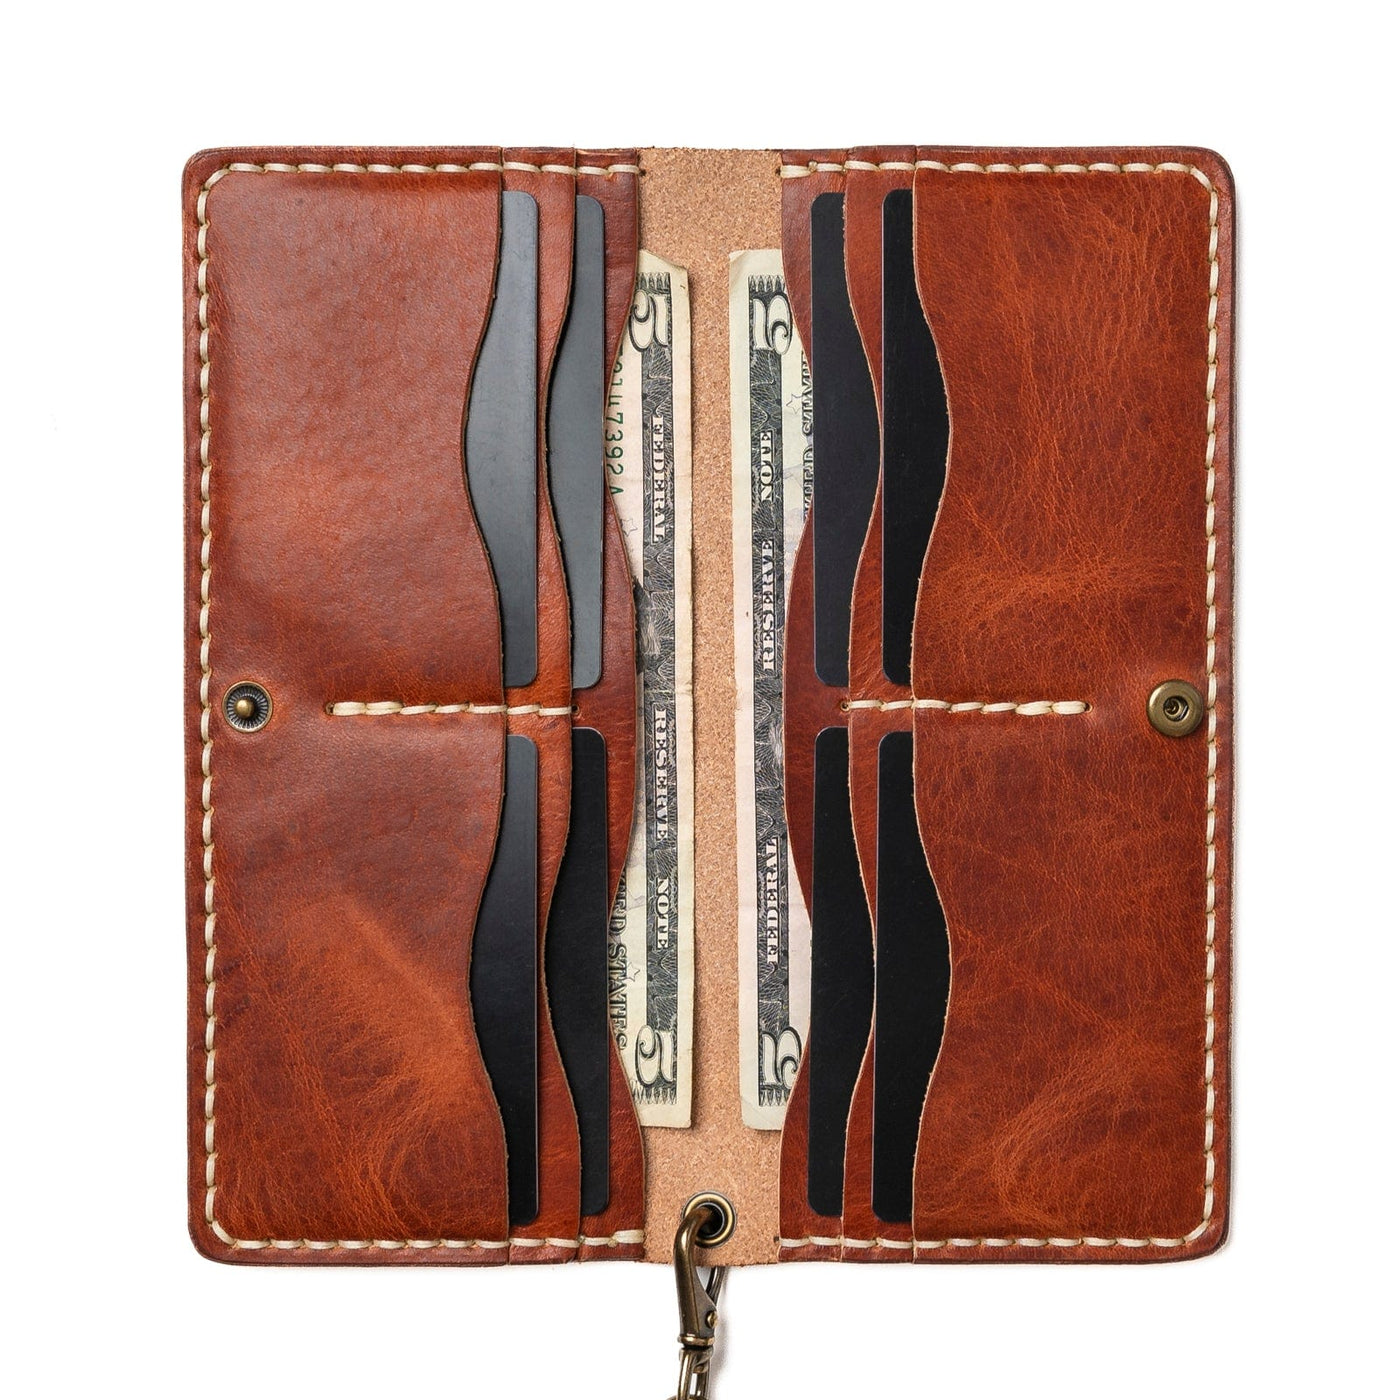 Leather Long Wallet - English Tan Popov Leather